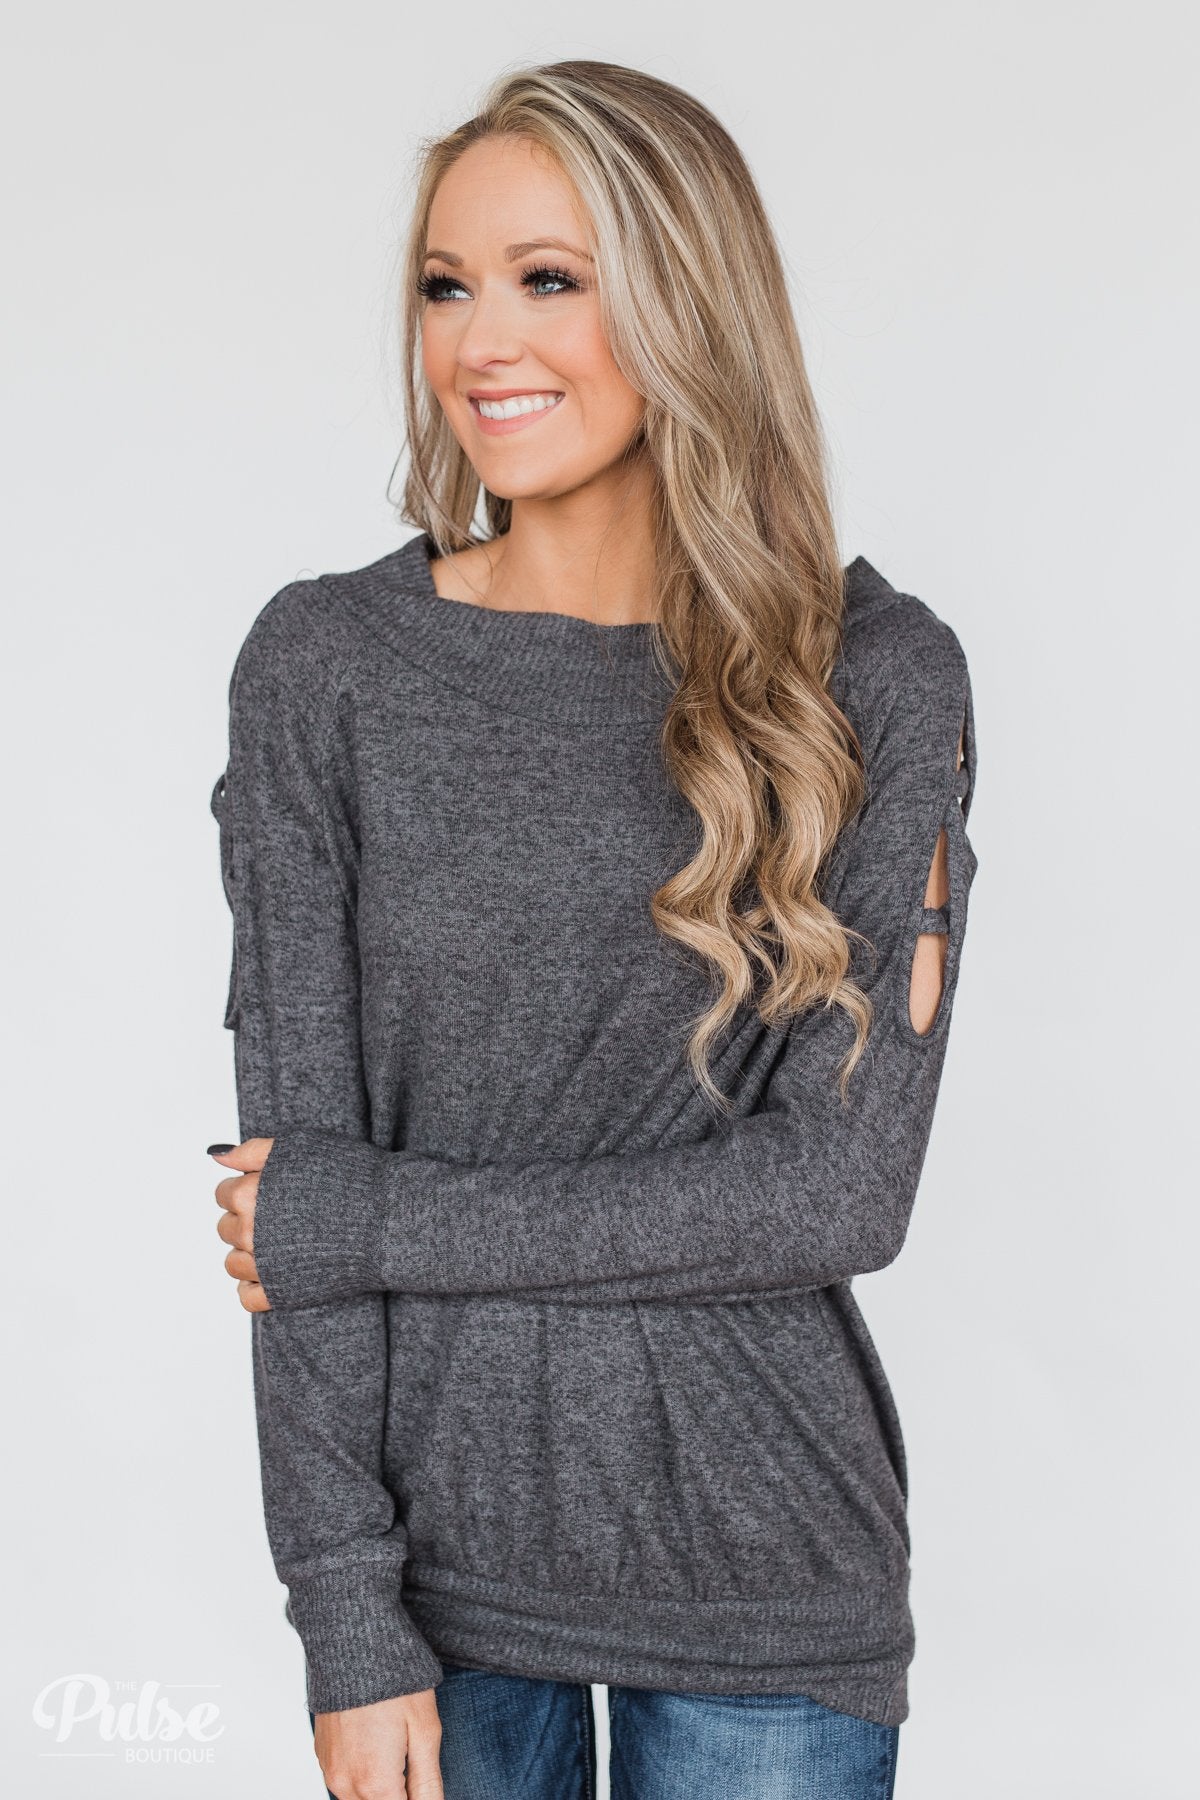 Keep Holding On Sleeve Detail Sweater- Charcoal